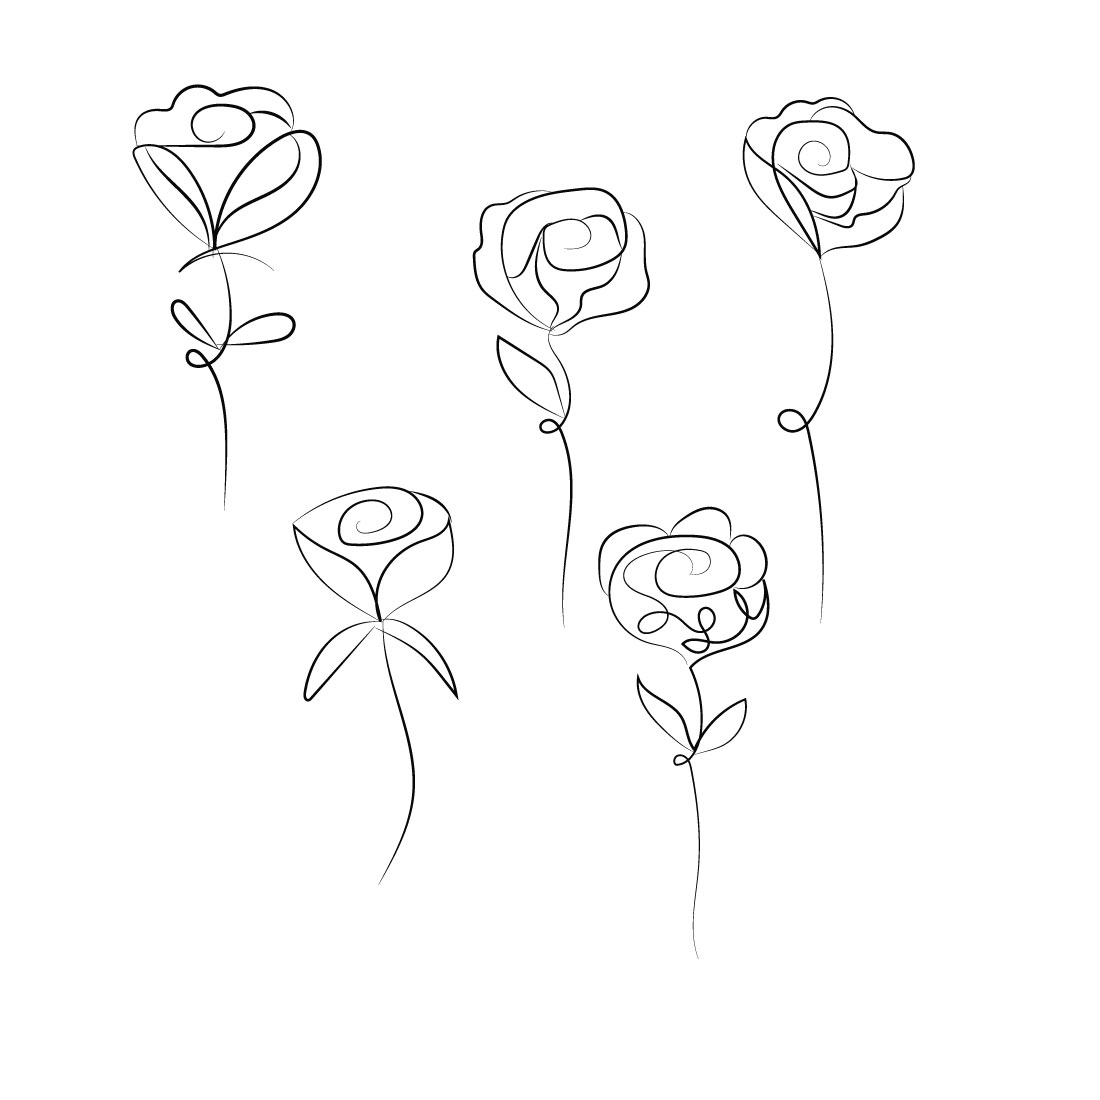 Cute Rose drowing preview image.